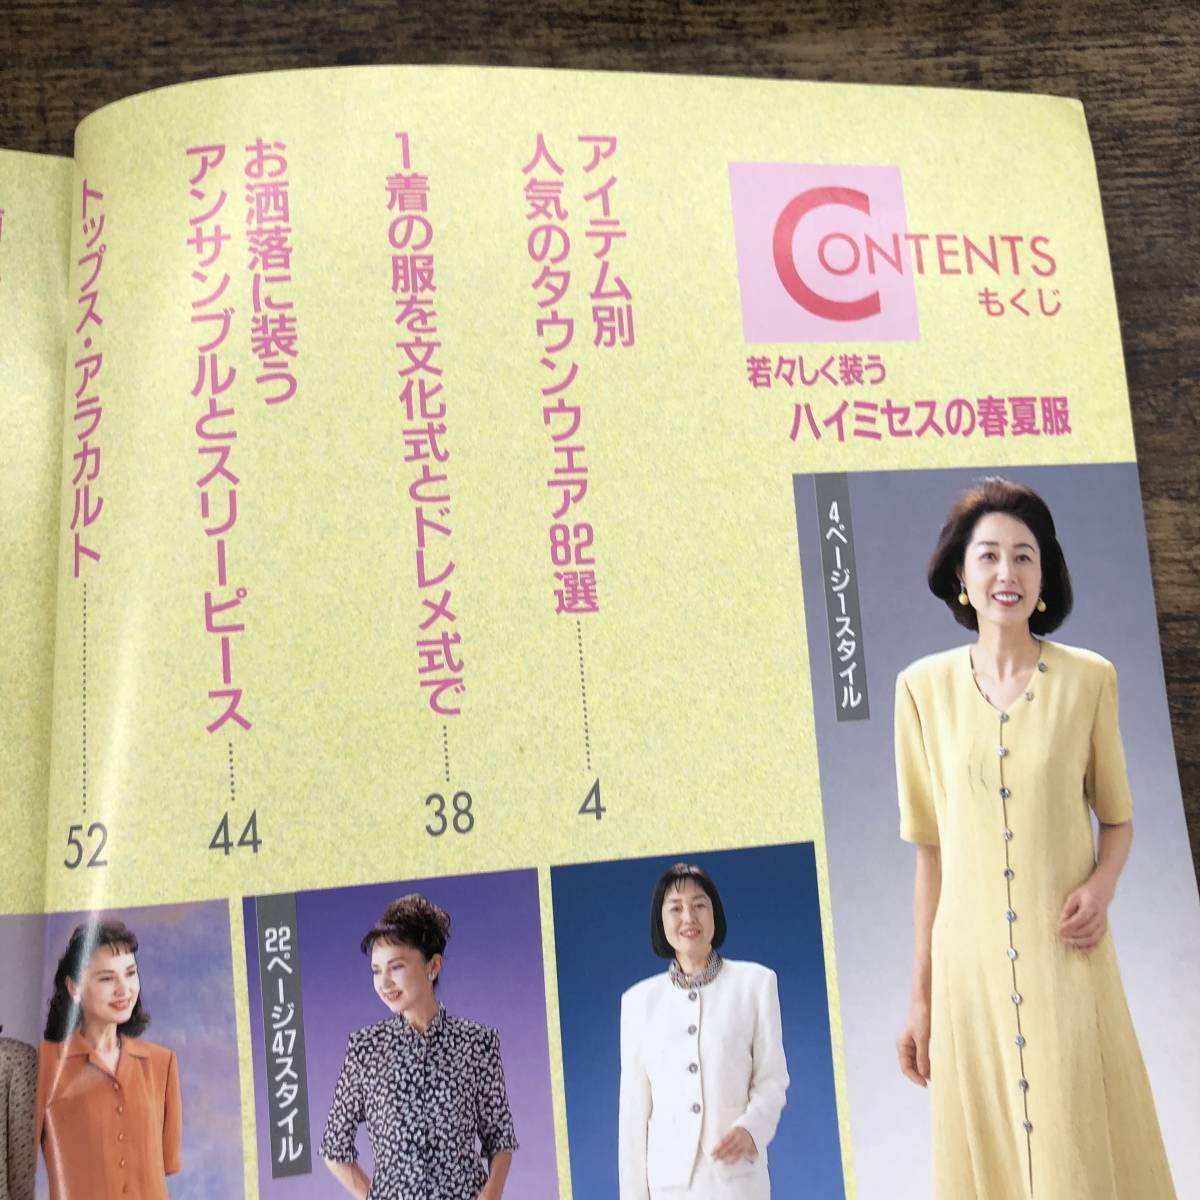 G-7824#.... equipment . high Mrs.. spring summer clothing # all drafting publication 180 point #btik company #2000 year 5 month 30 day issue the first version #